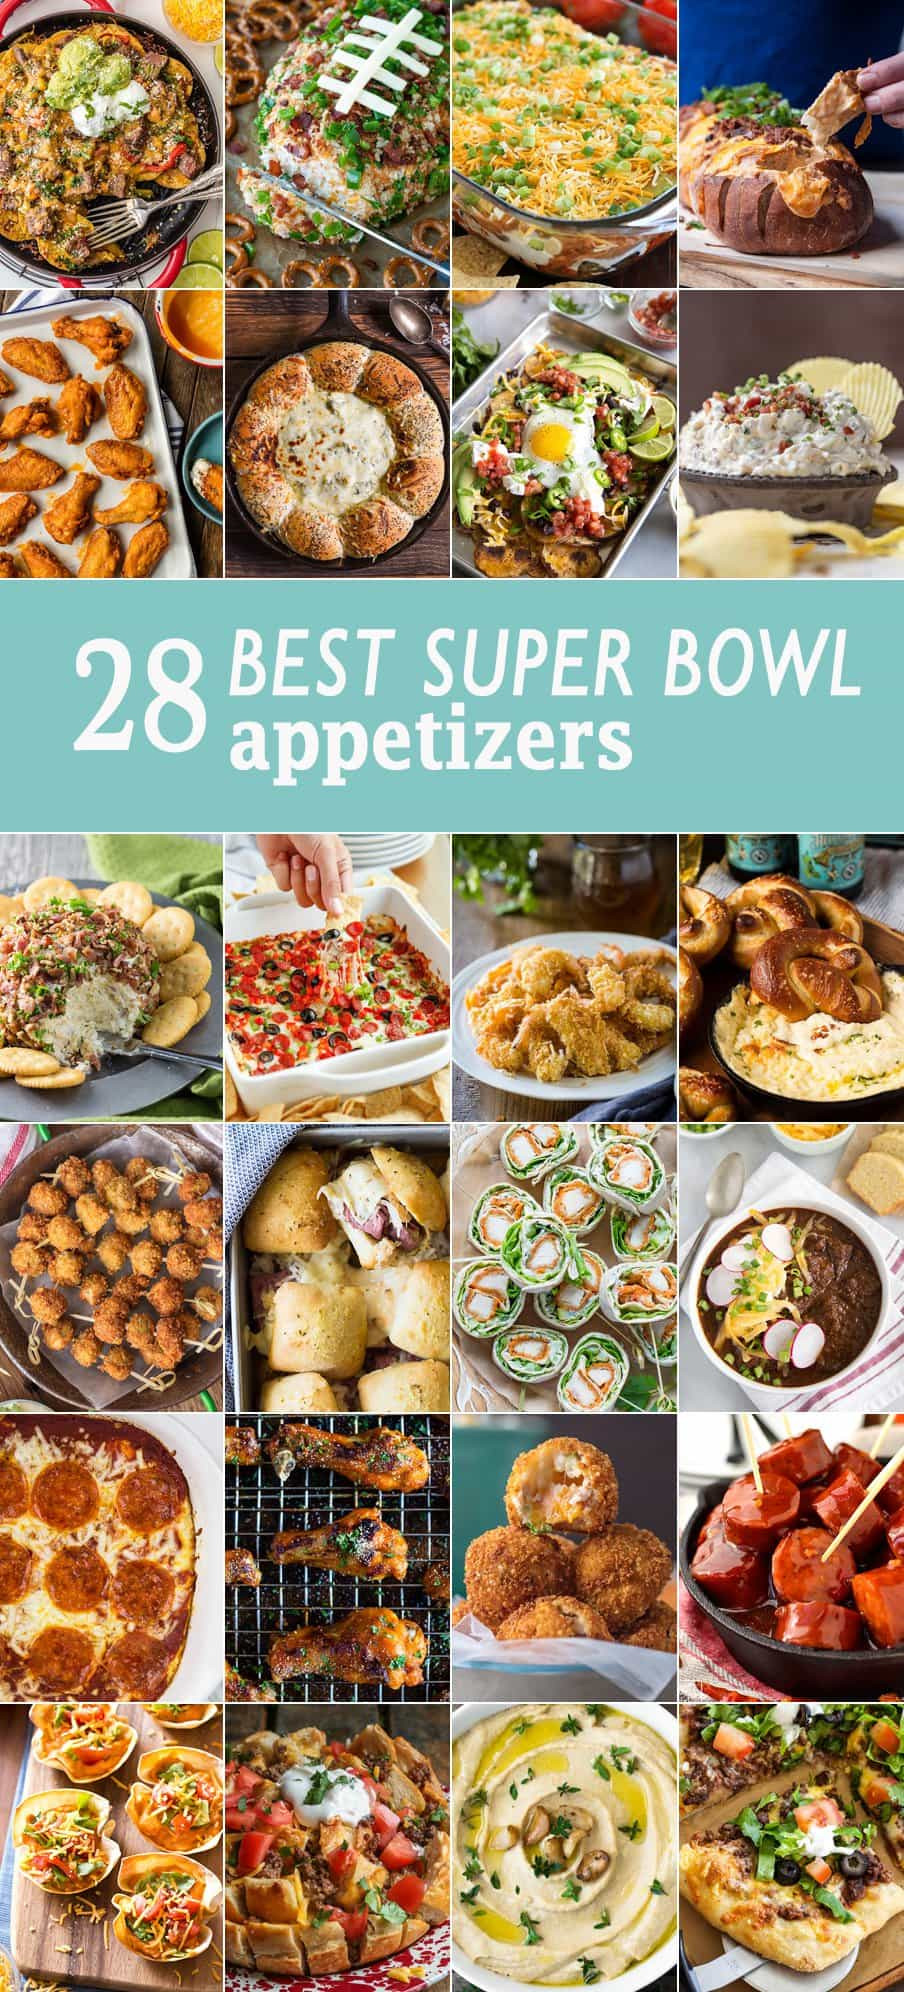 Recipes For Super Bowl Appetizers
 10 Best Super Bowl Appetizers The Cookie Rookie